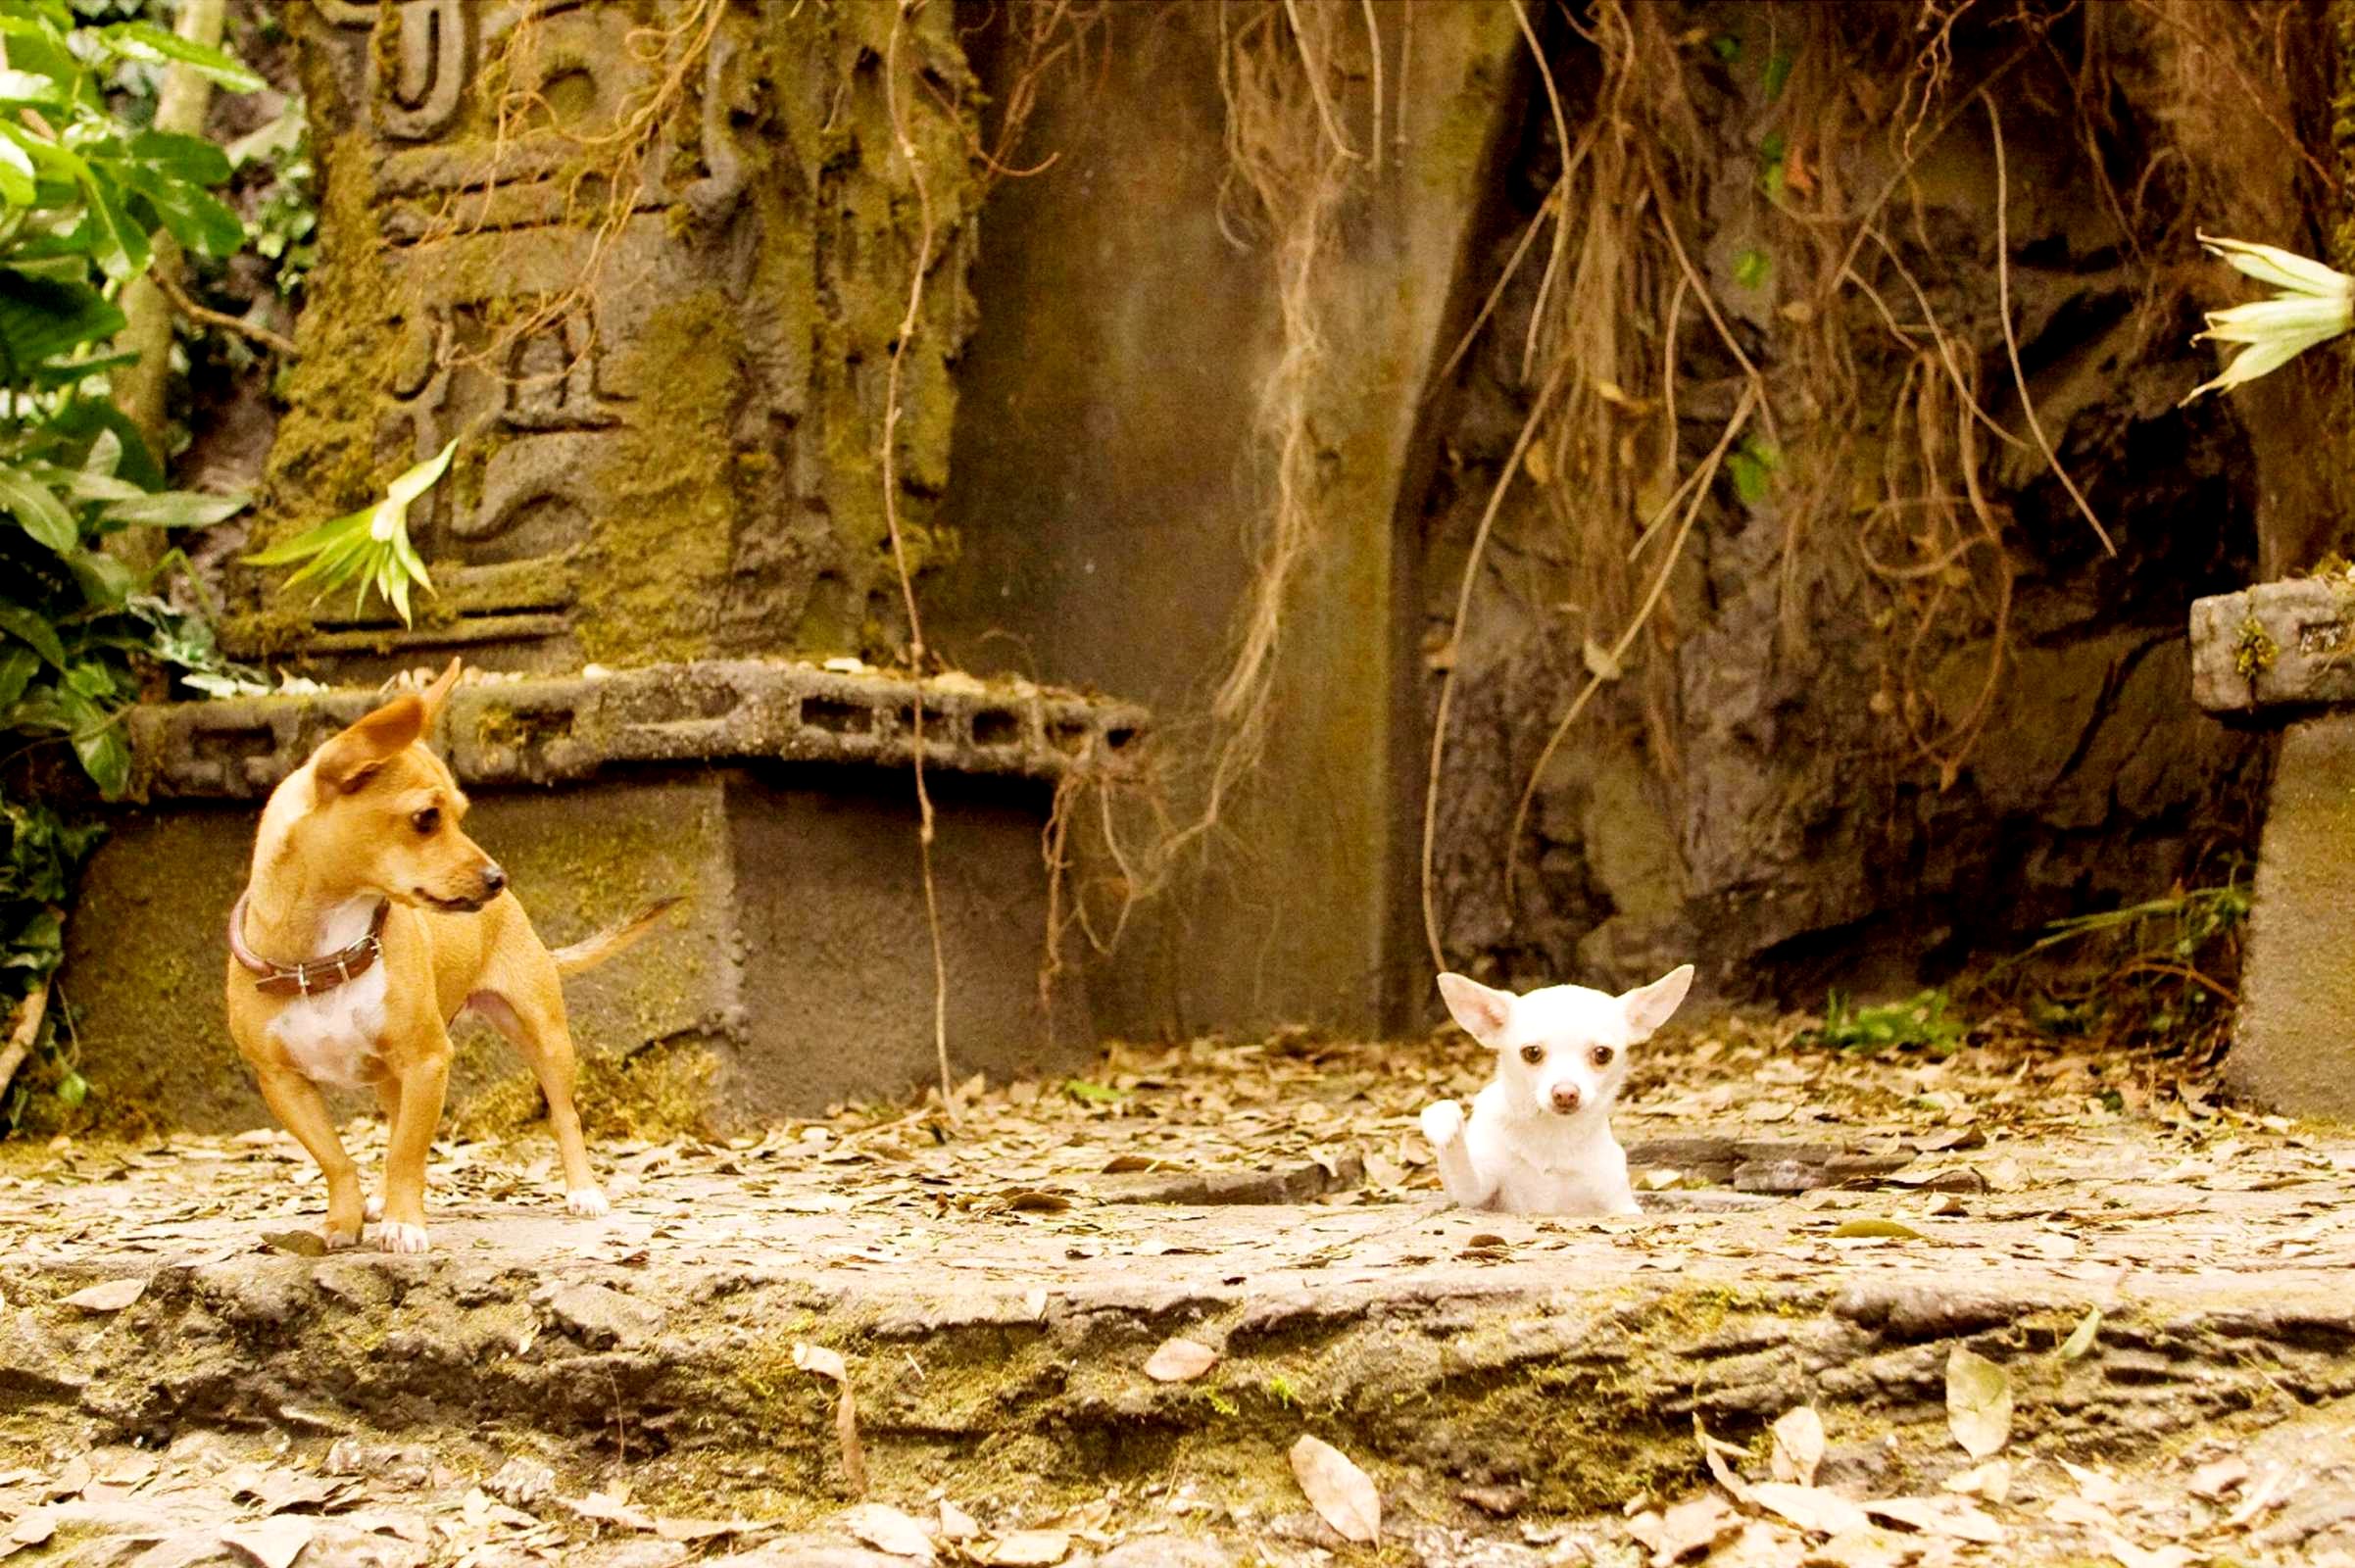 A scene from Walt Disney Pictures' Beverly Hills Chihuahua (2008). Photo credit by Daniel Daza.